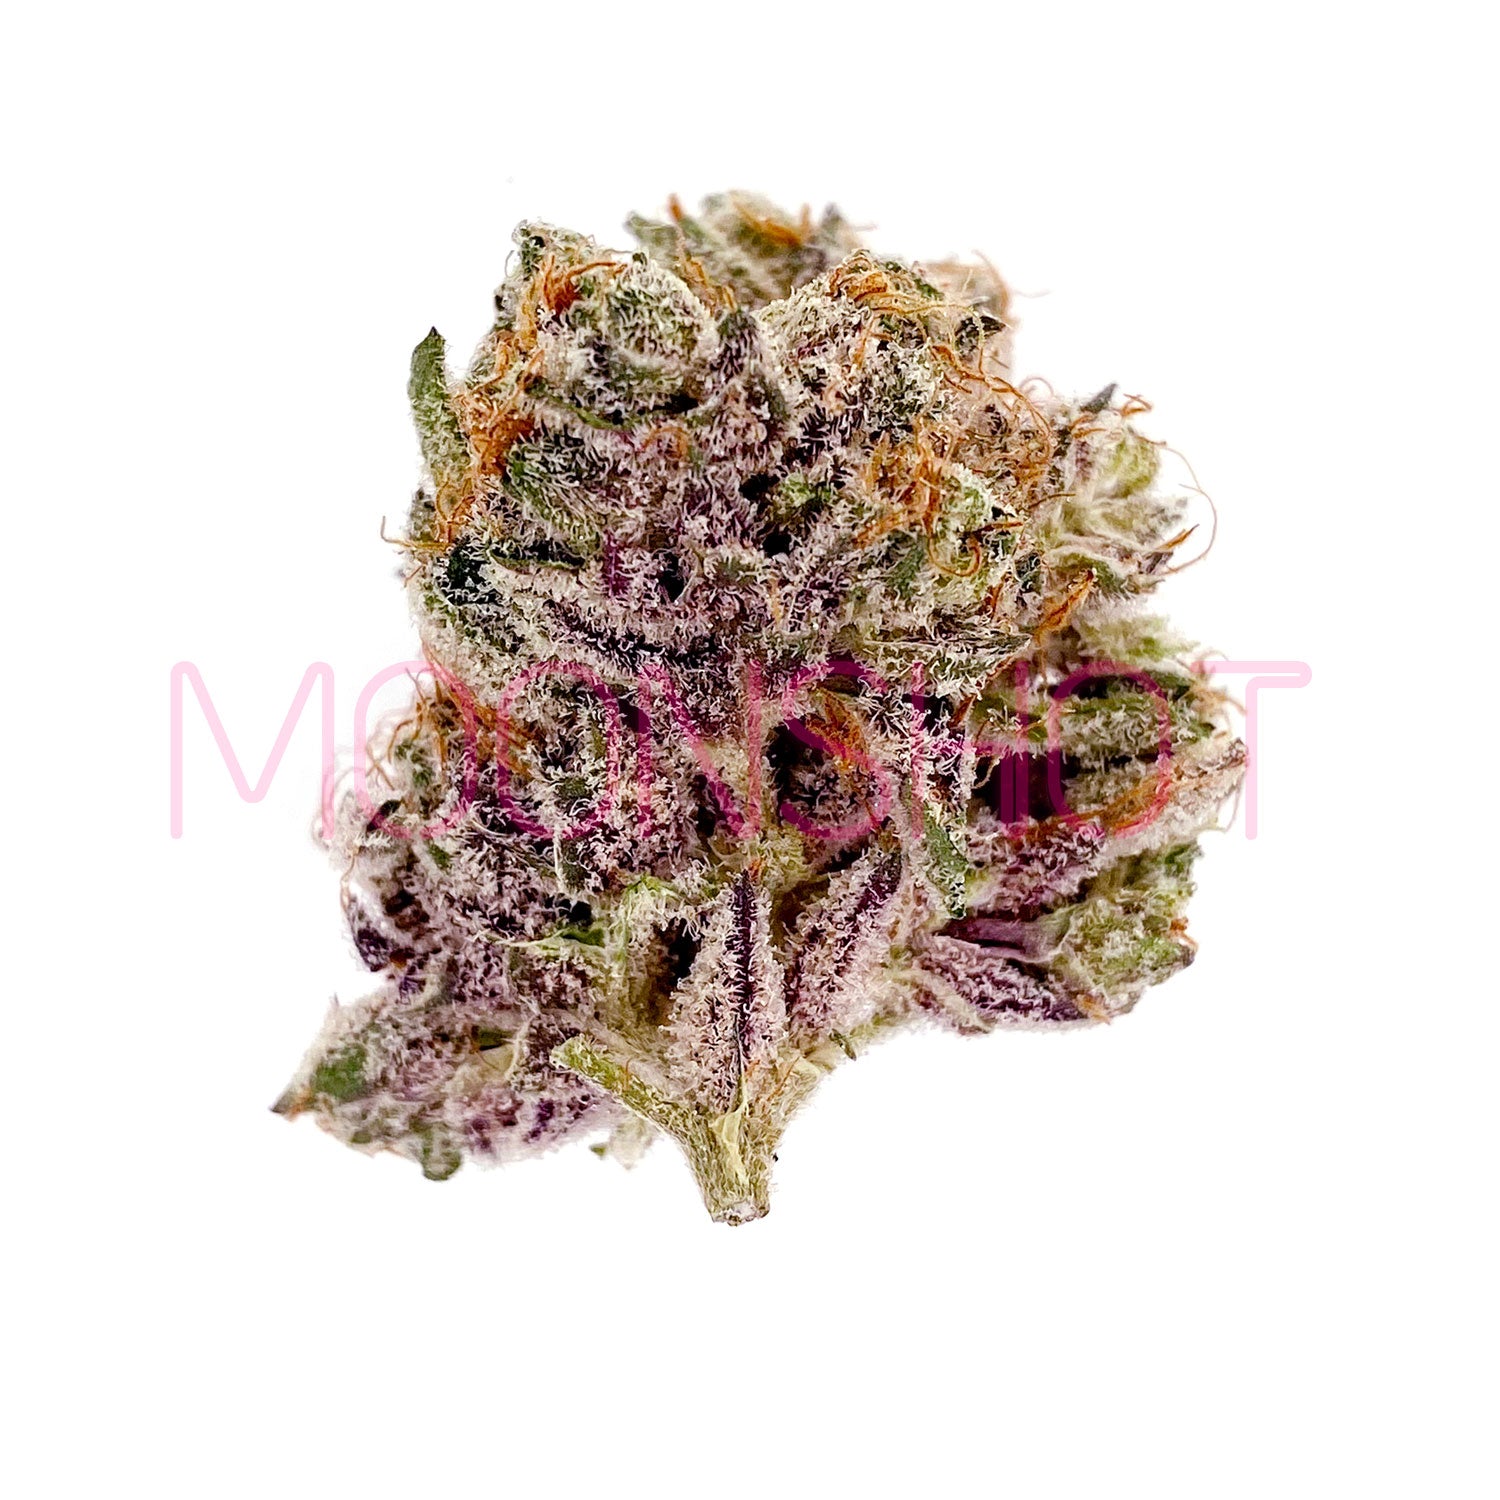 A nug of cannabis flower from the Black Rainbow Sherbert strain sits against a white background.